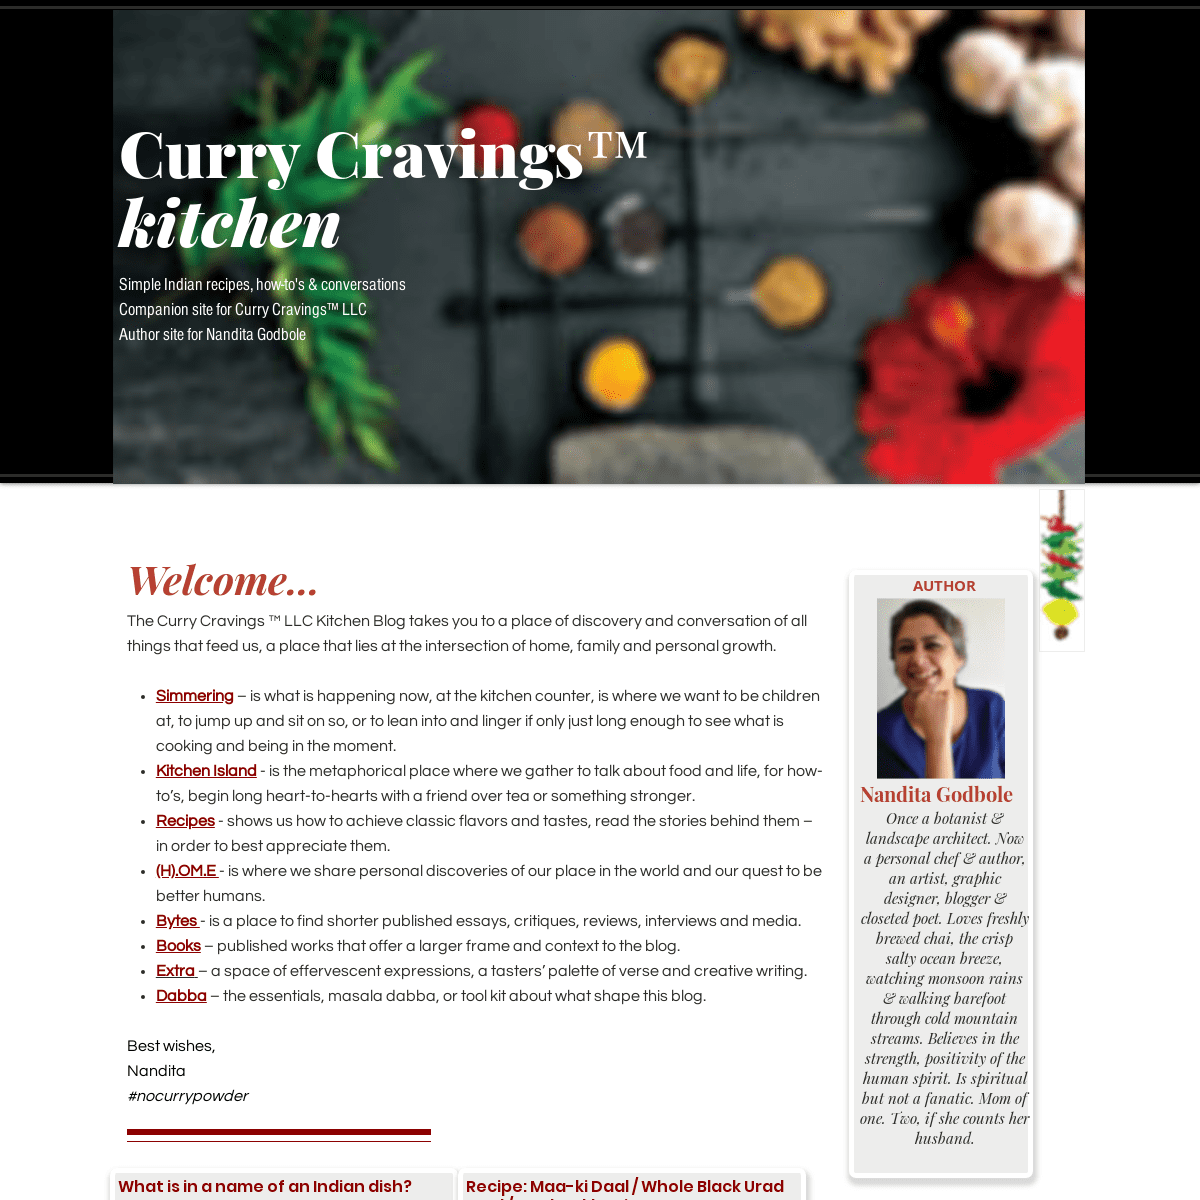 A complete backup of currycravingskitchen.com